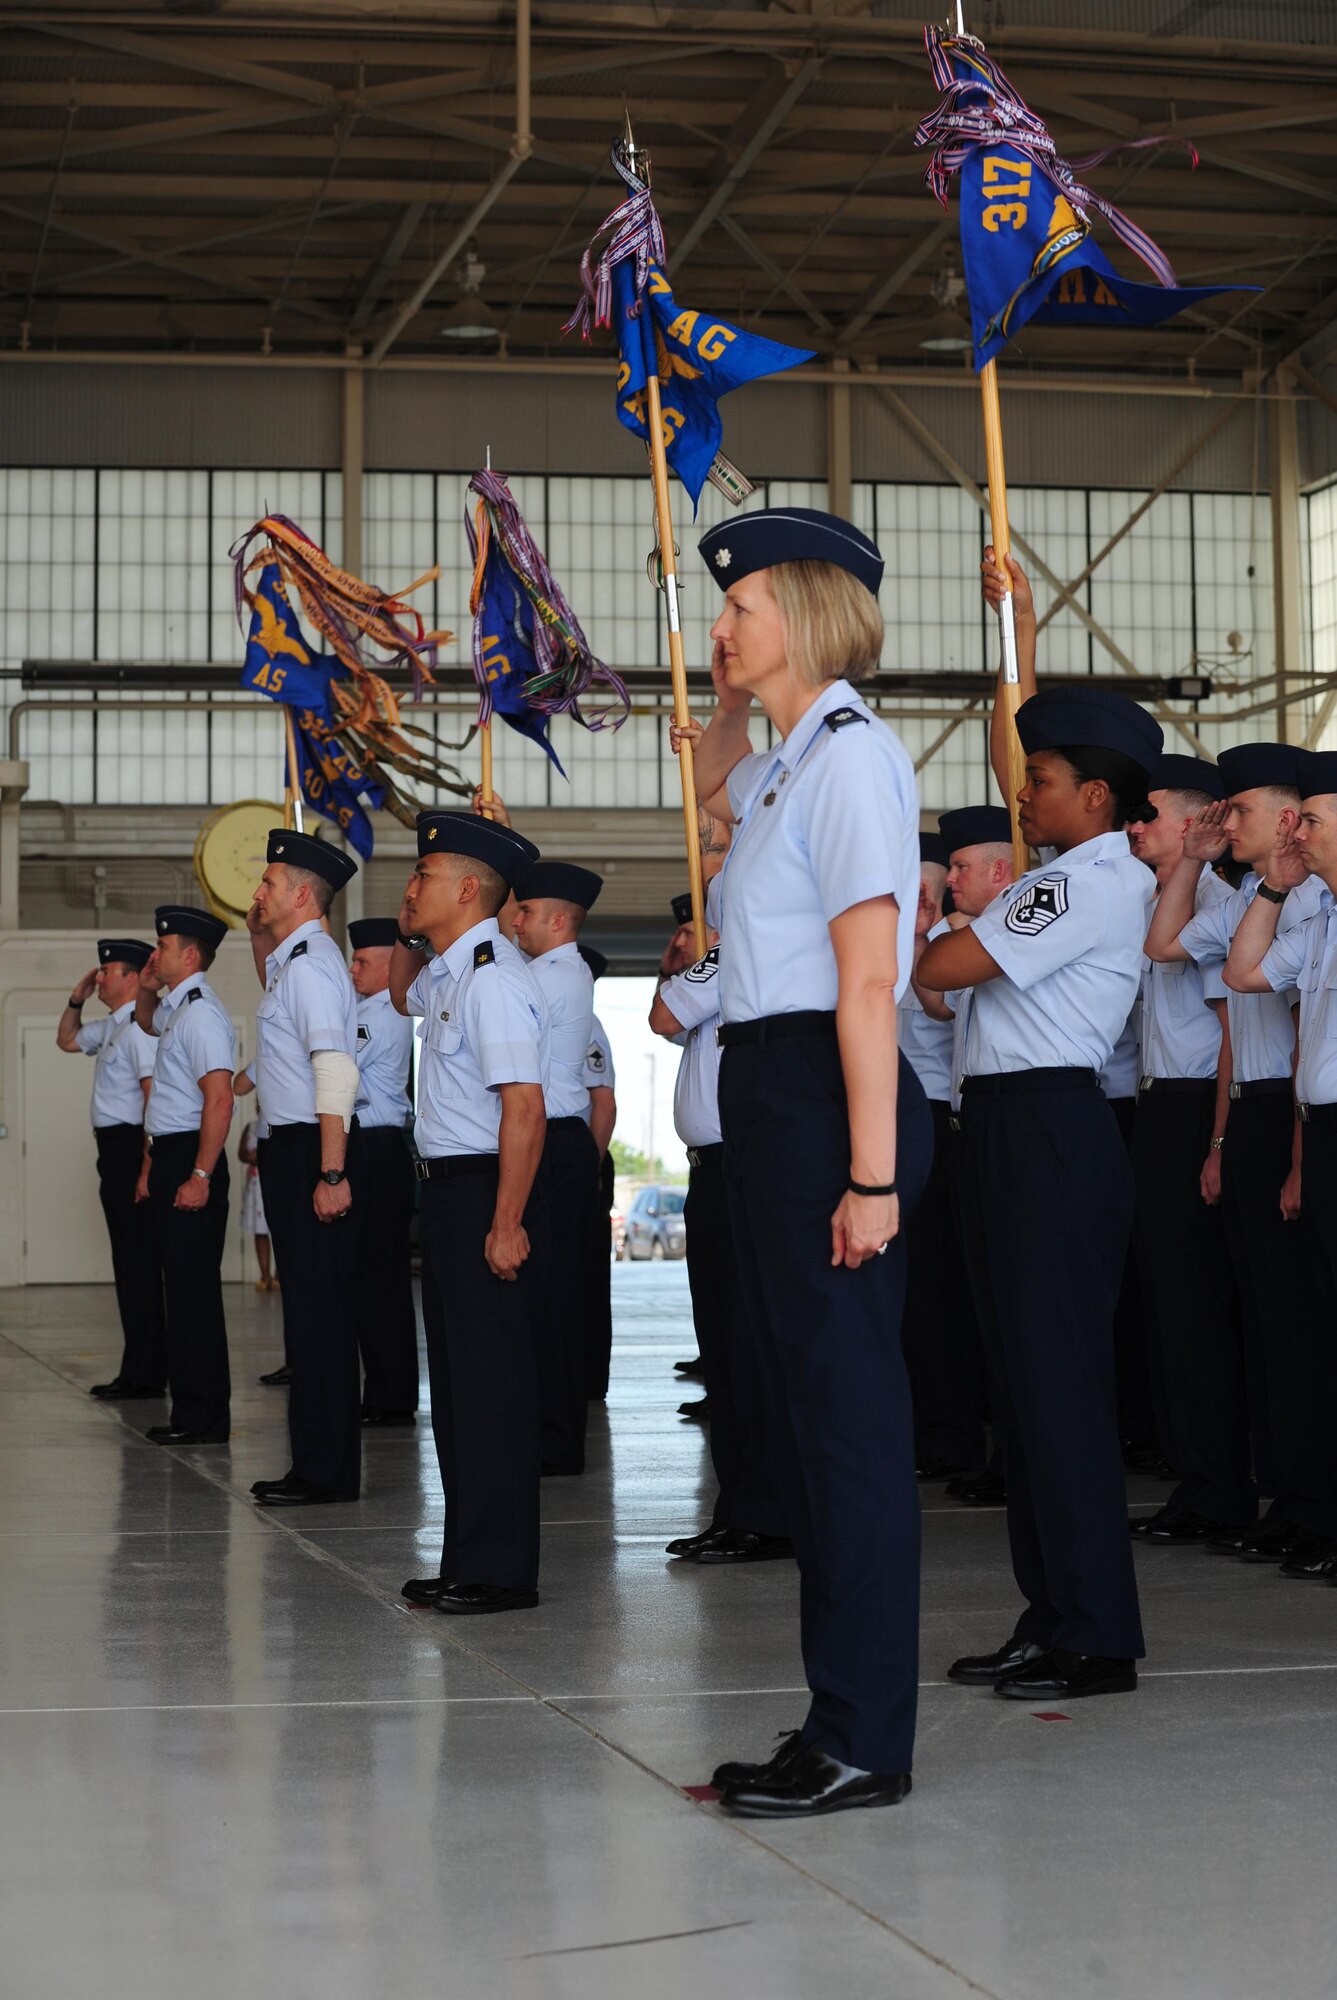 U.S. Air Force Airmen from the 317th Airlift Wing render a salute during the 317th AW activation ceremony at Dyess Air Force Base, Texas, July 6, 2017. The 317th AW supports the Department of Defense, Joint Chiefs of Staff and higher headquarter taskings, and reports to the 18th Air Force at Scott AFB, Ill. (U.S. Air Force photo by Airman 1st Class April Lancto)